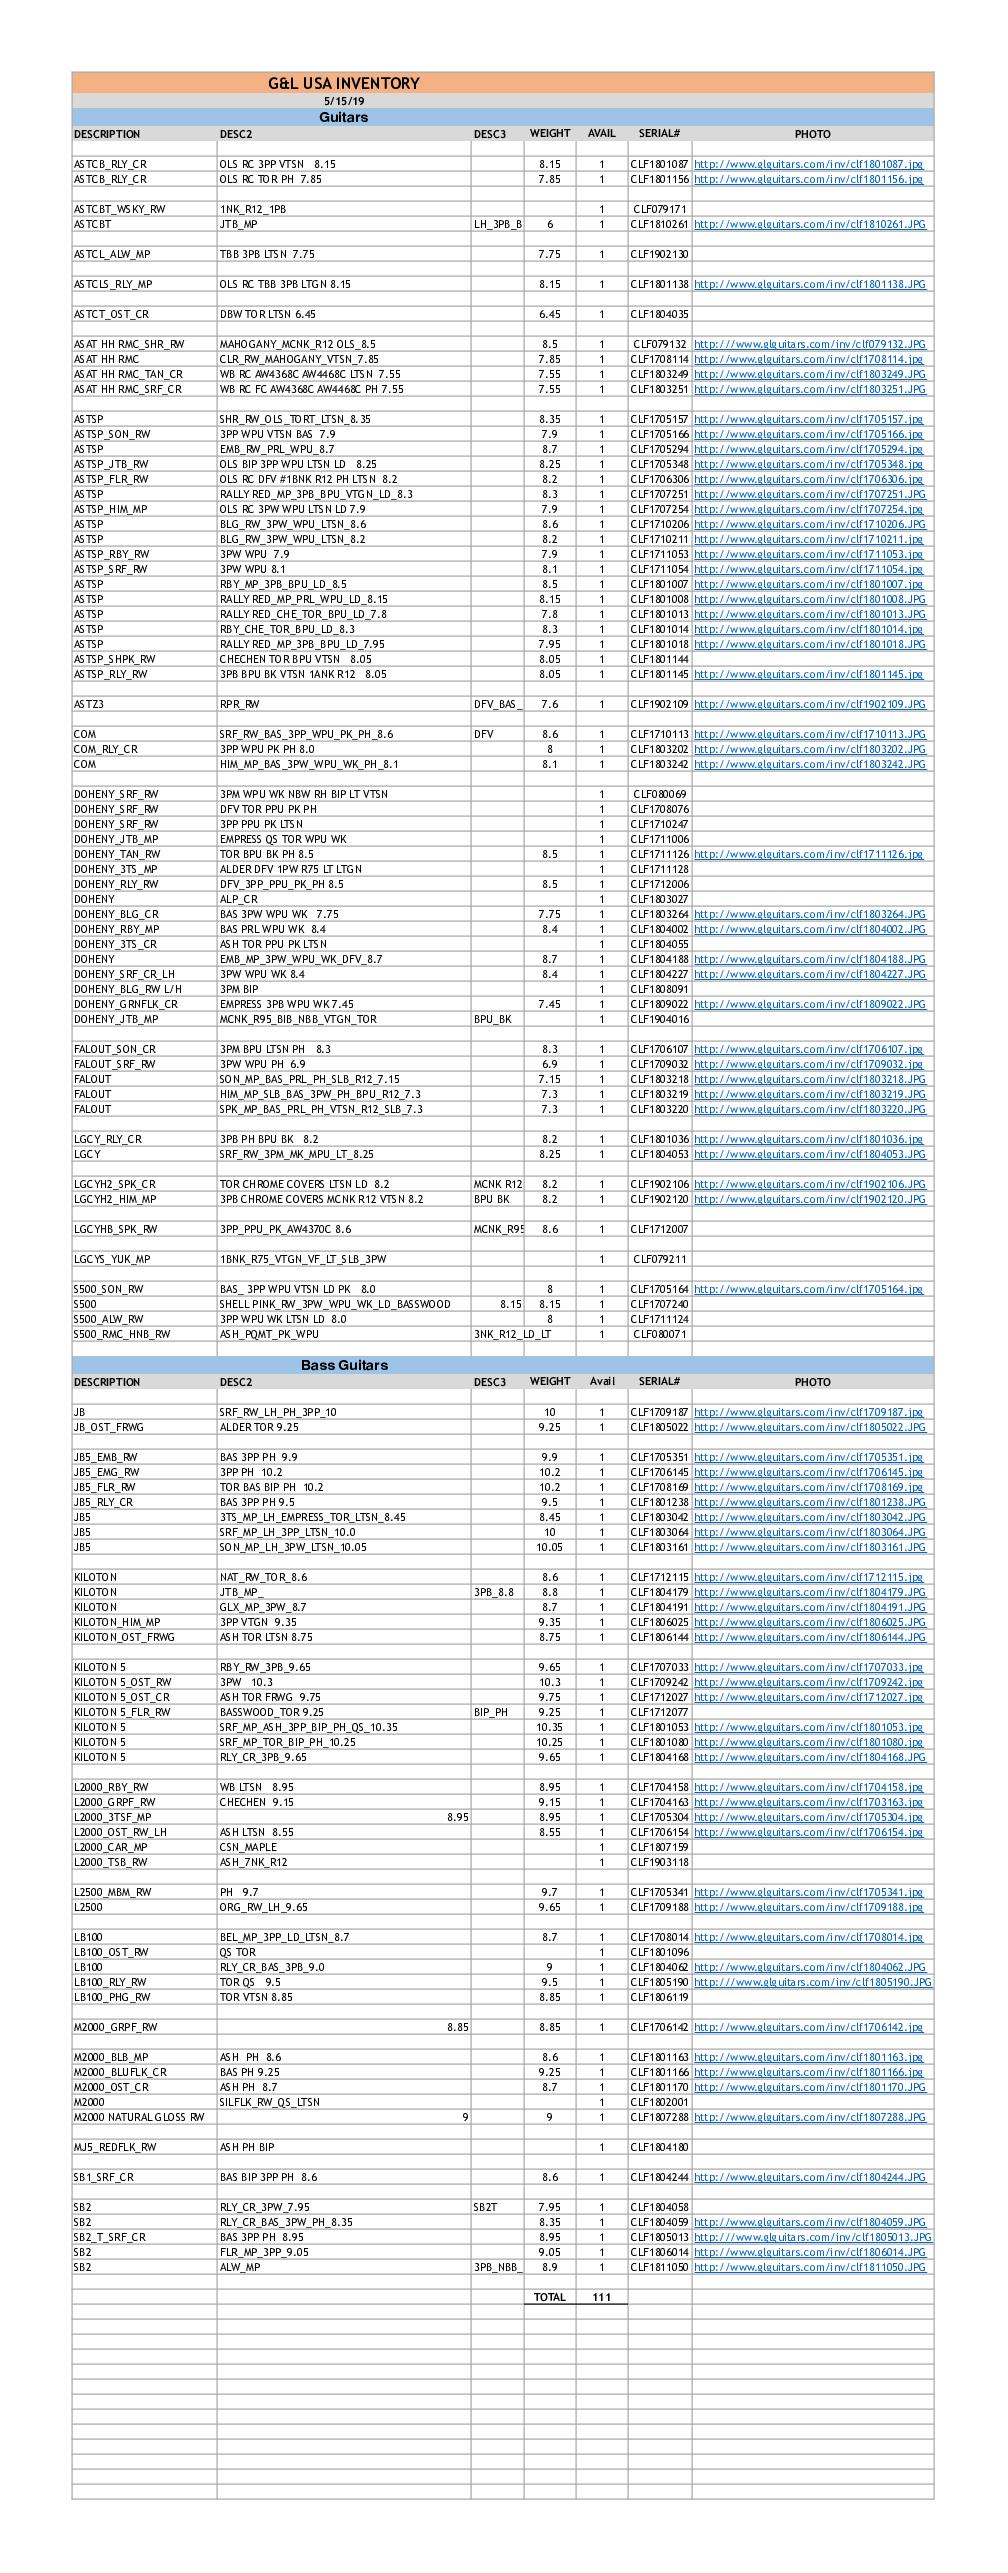 G&L Inventory-05/15/2019 (PDF) - with Option Codes